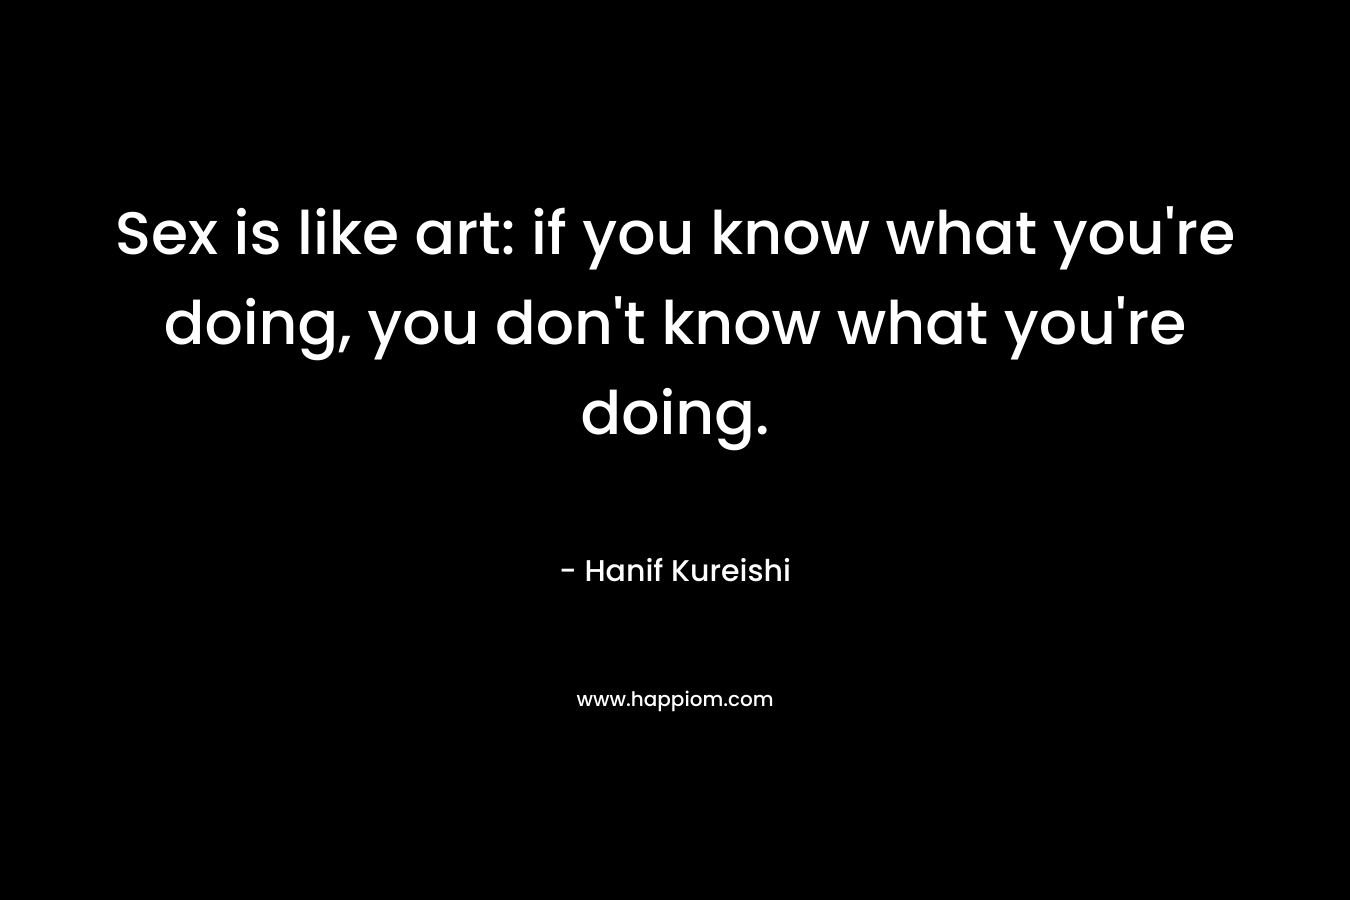 Sex is like art: if you know what you’re doing, you don’t know what you’re doing. – Hanif Kureishi